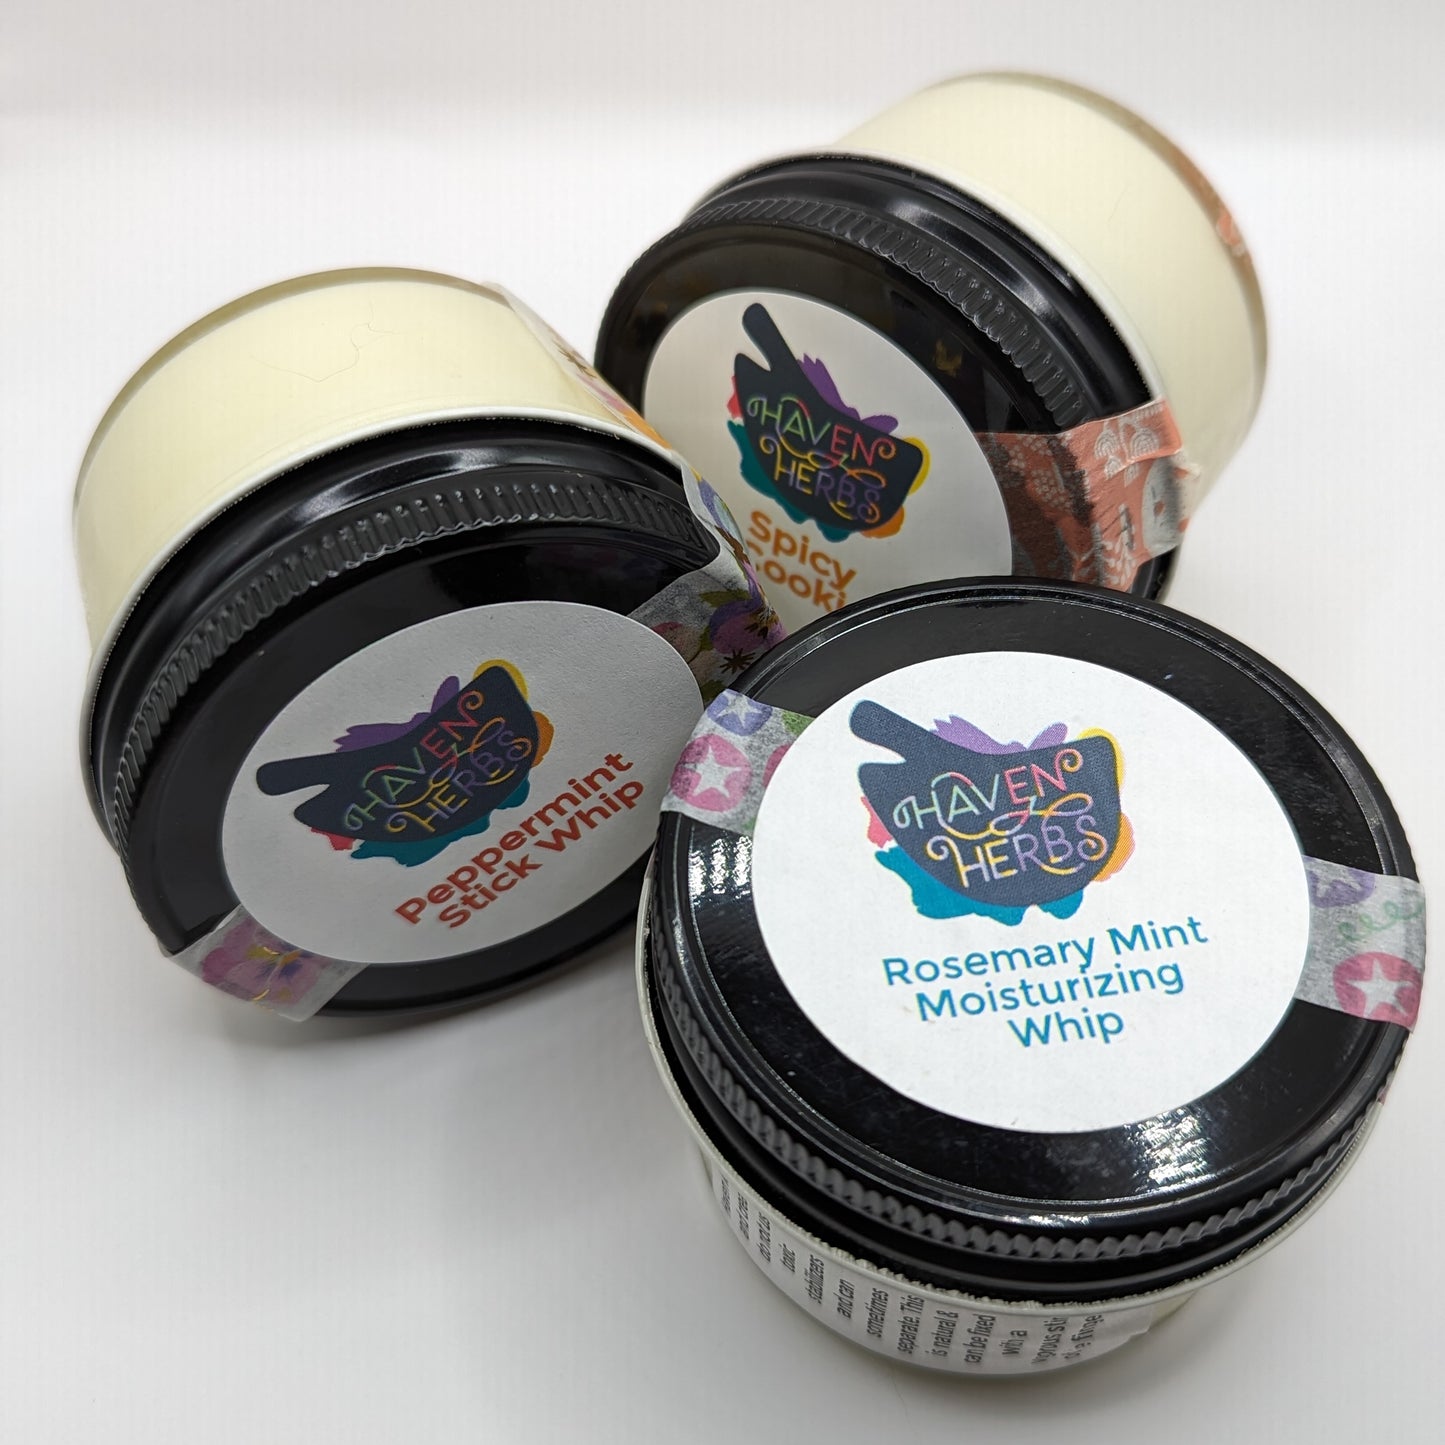 Moisturizing Whips by Haven Herbs. Non-toxic lotion packaged in glass.